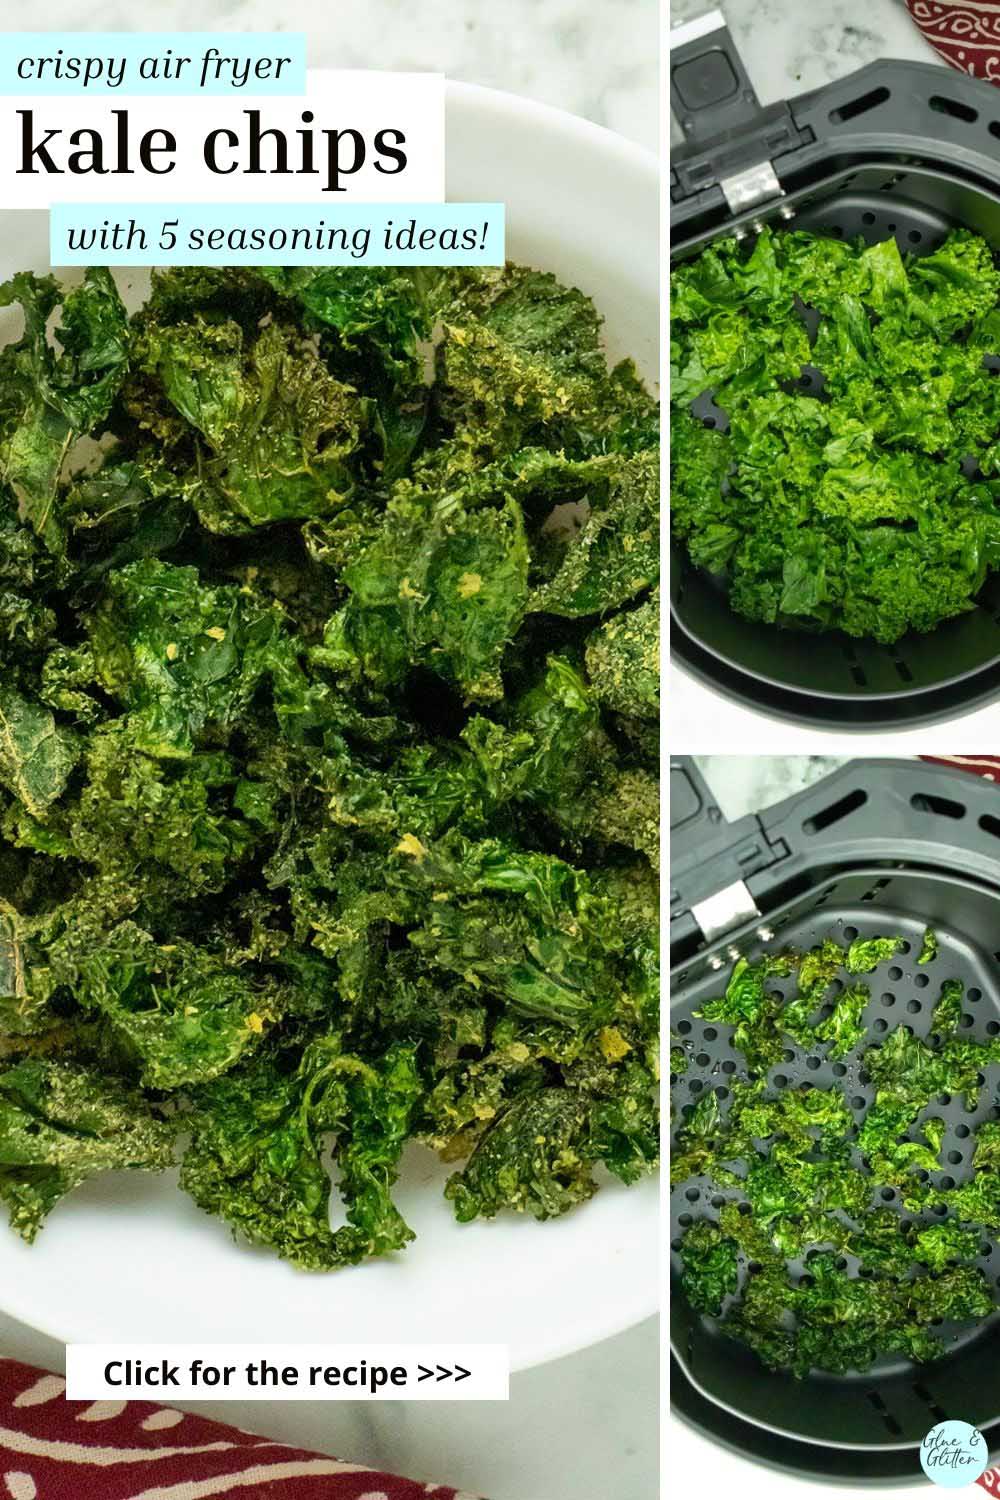 image collage of air fryer kale chips in a bowl and in the air fryer basket before and after cooking, text overlay